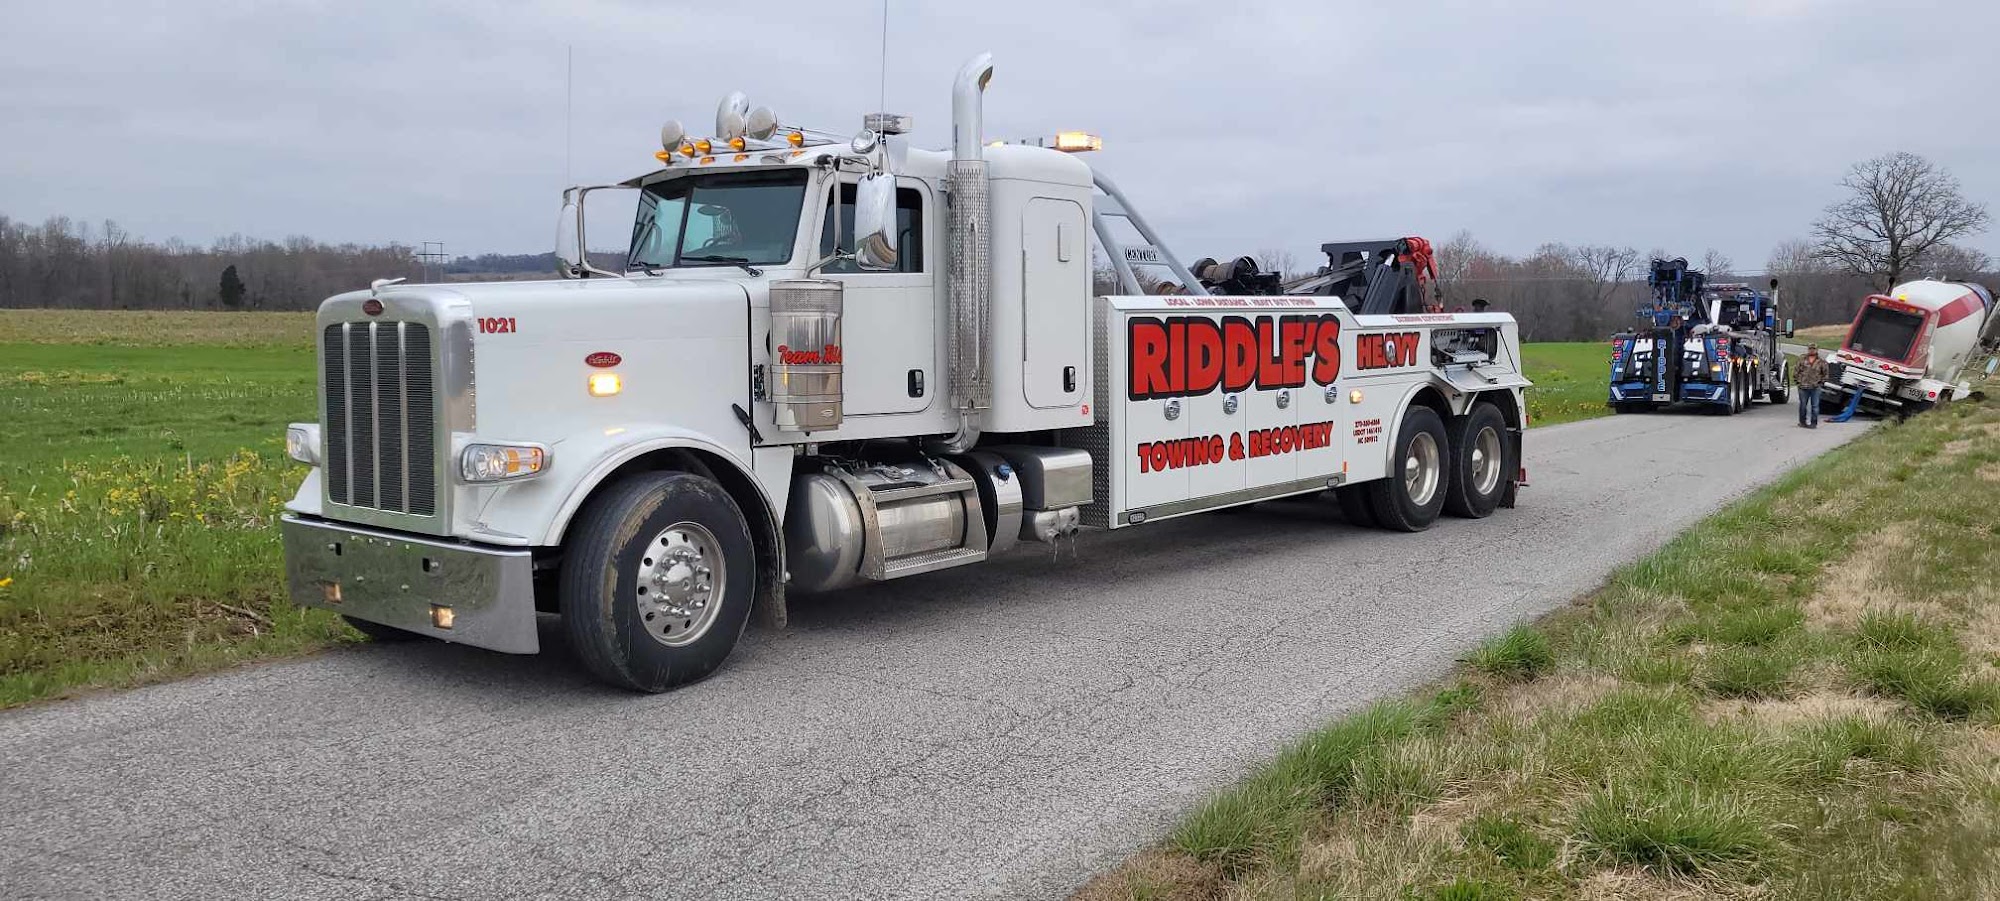 Riddle's 24 Hour Towing & Lockout, LLC 94 Clay St, Cadiz Kentucky 42211